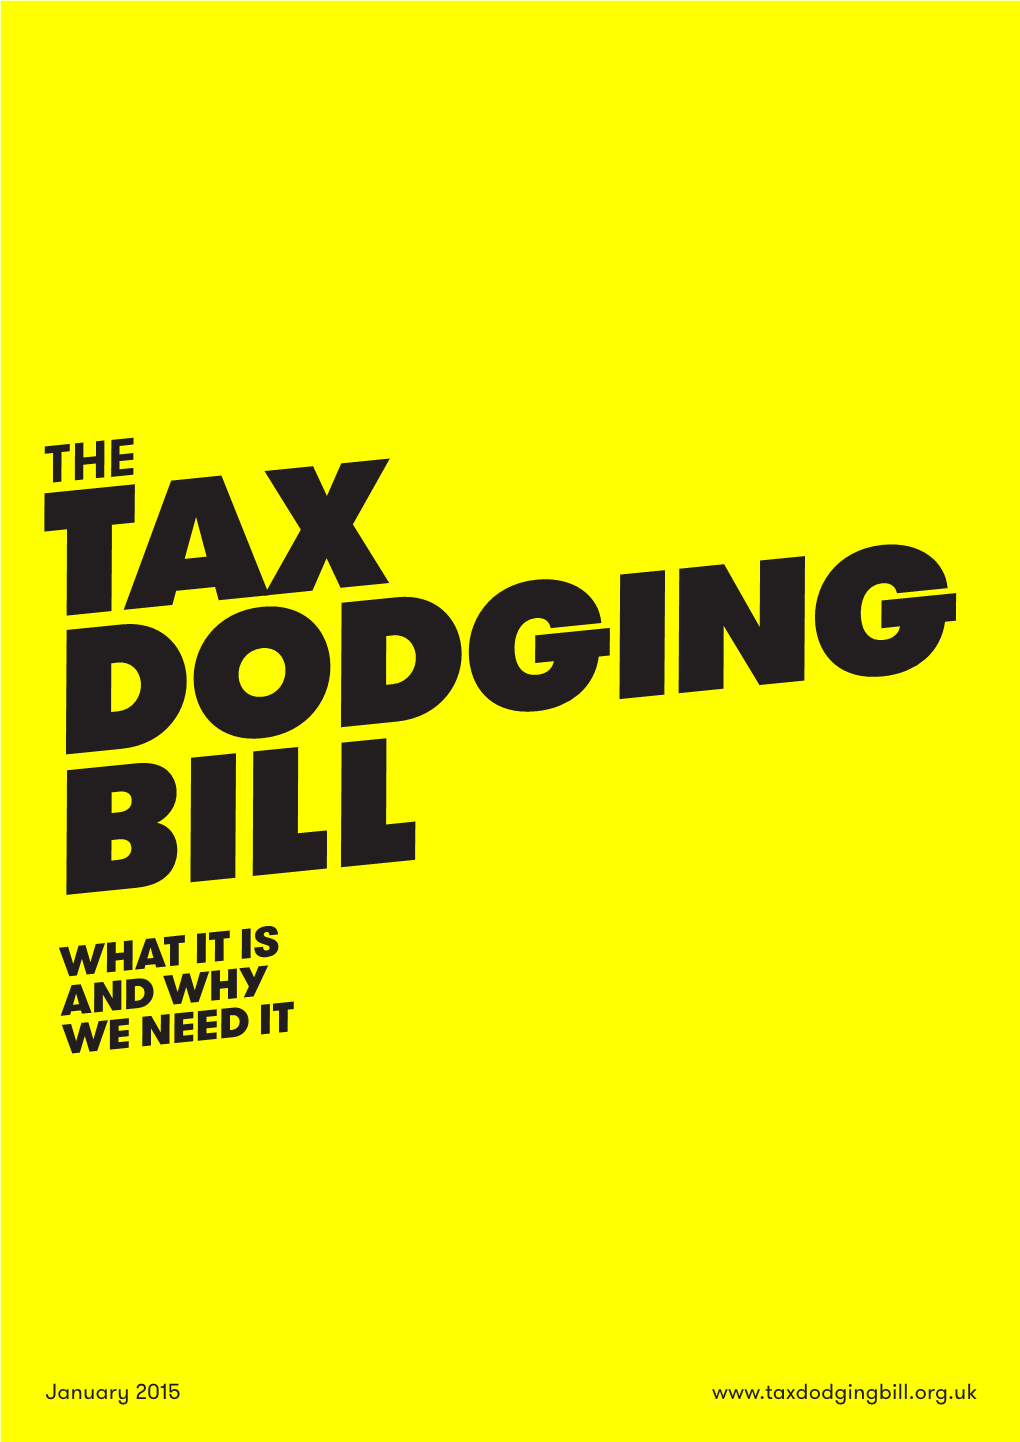 The Tax Dodging Bill: What It Is and Why We Need It